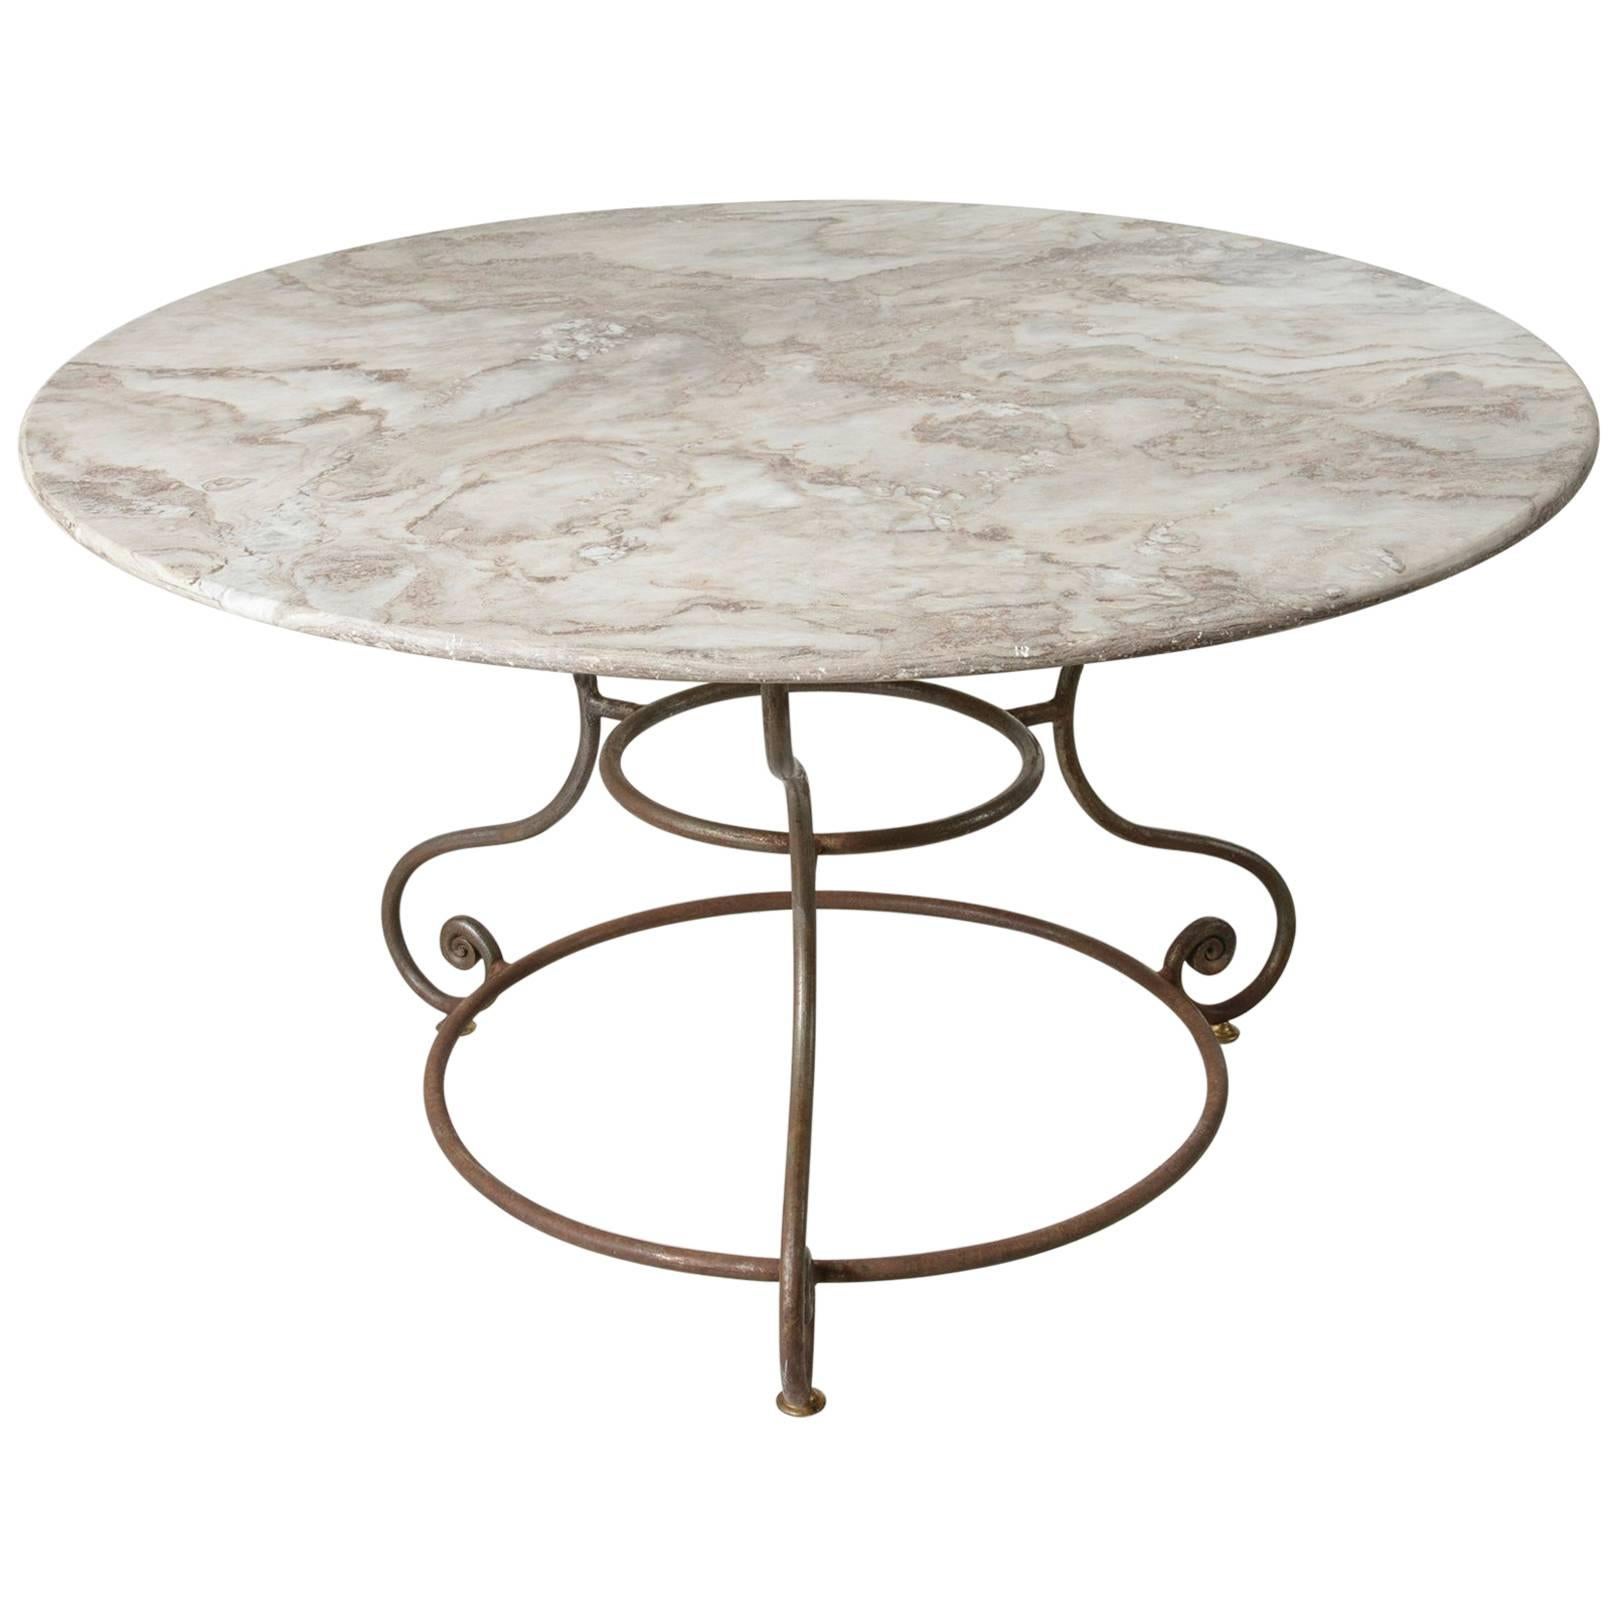 French Large Round Iron Base Garden Table with Exceptional Marble Top